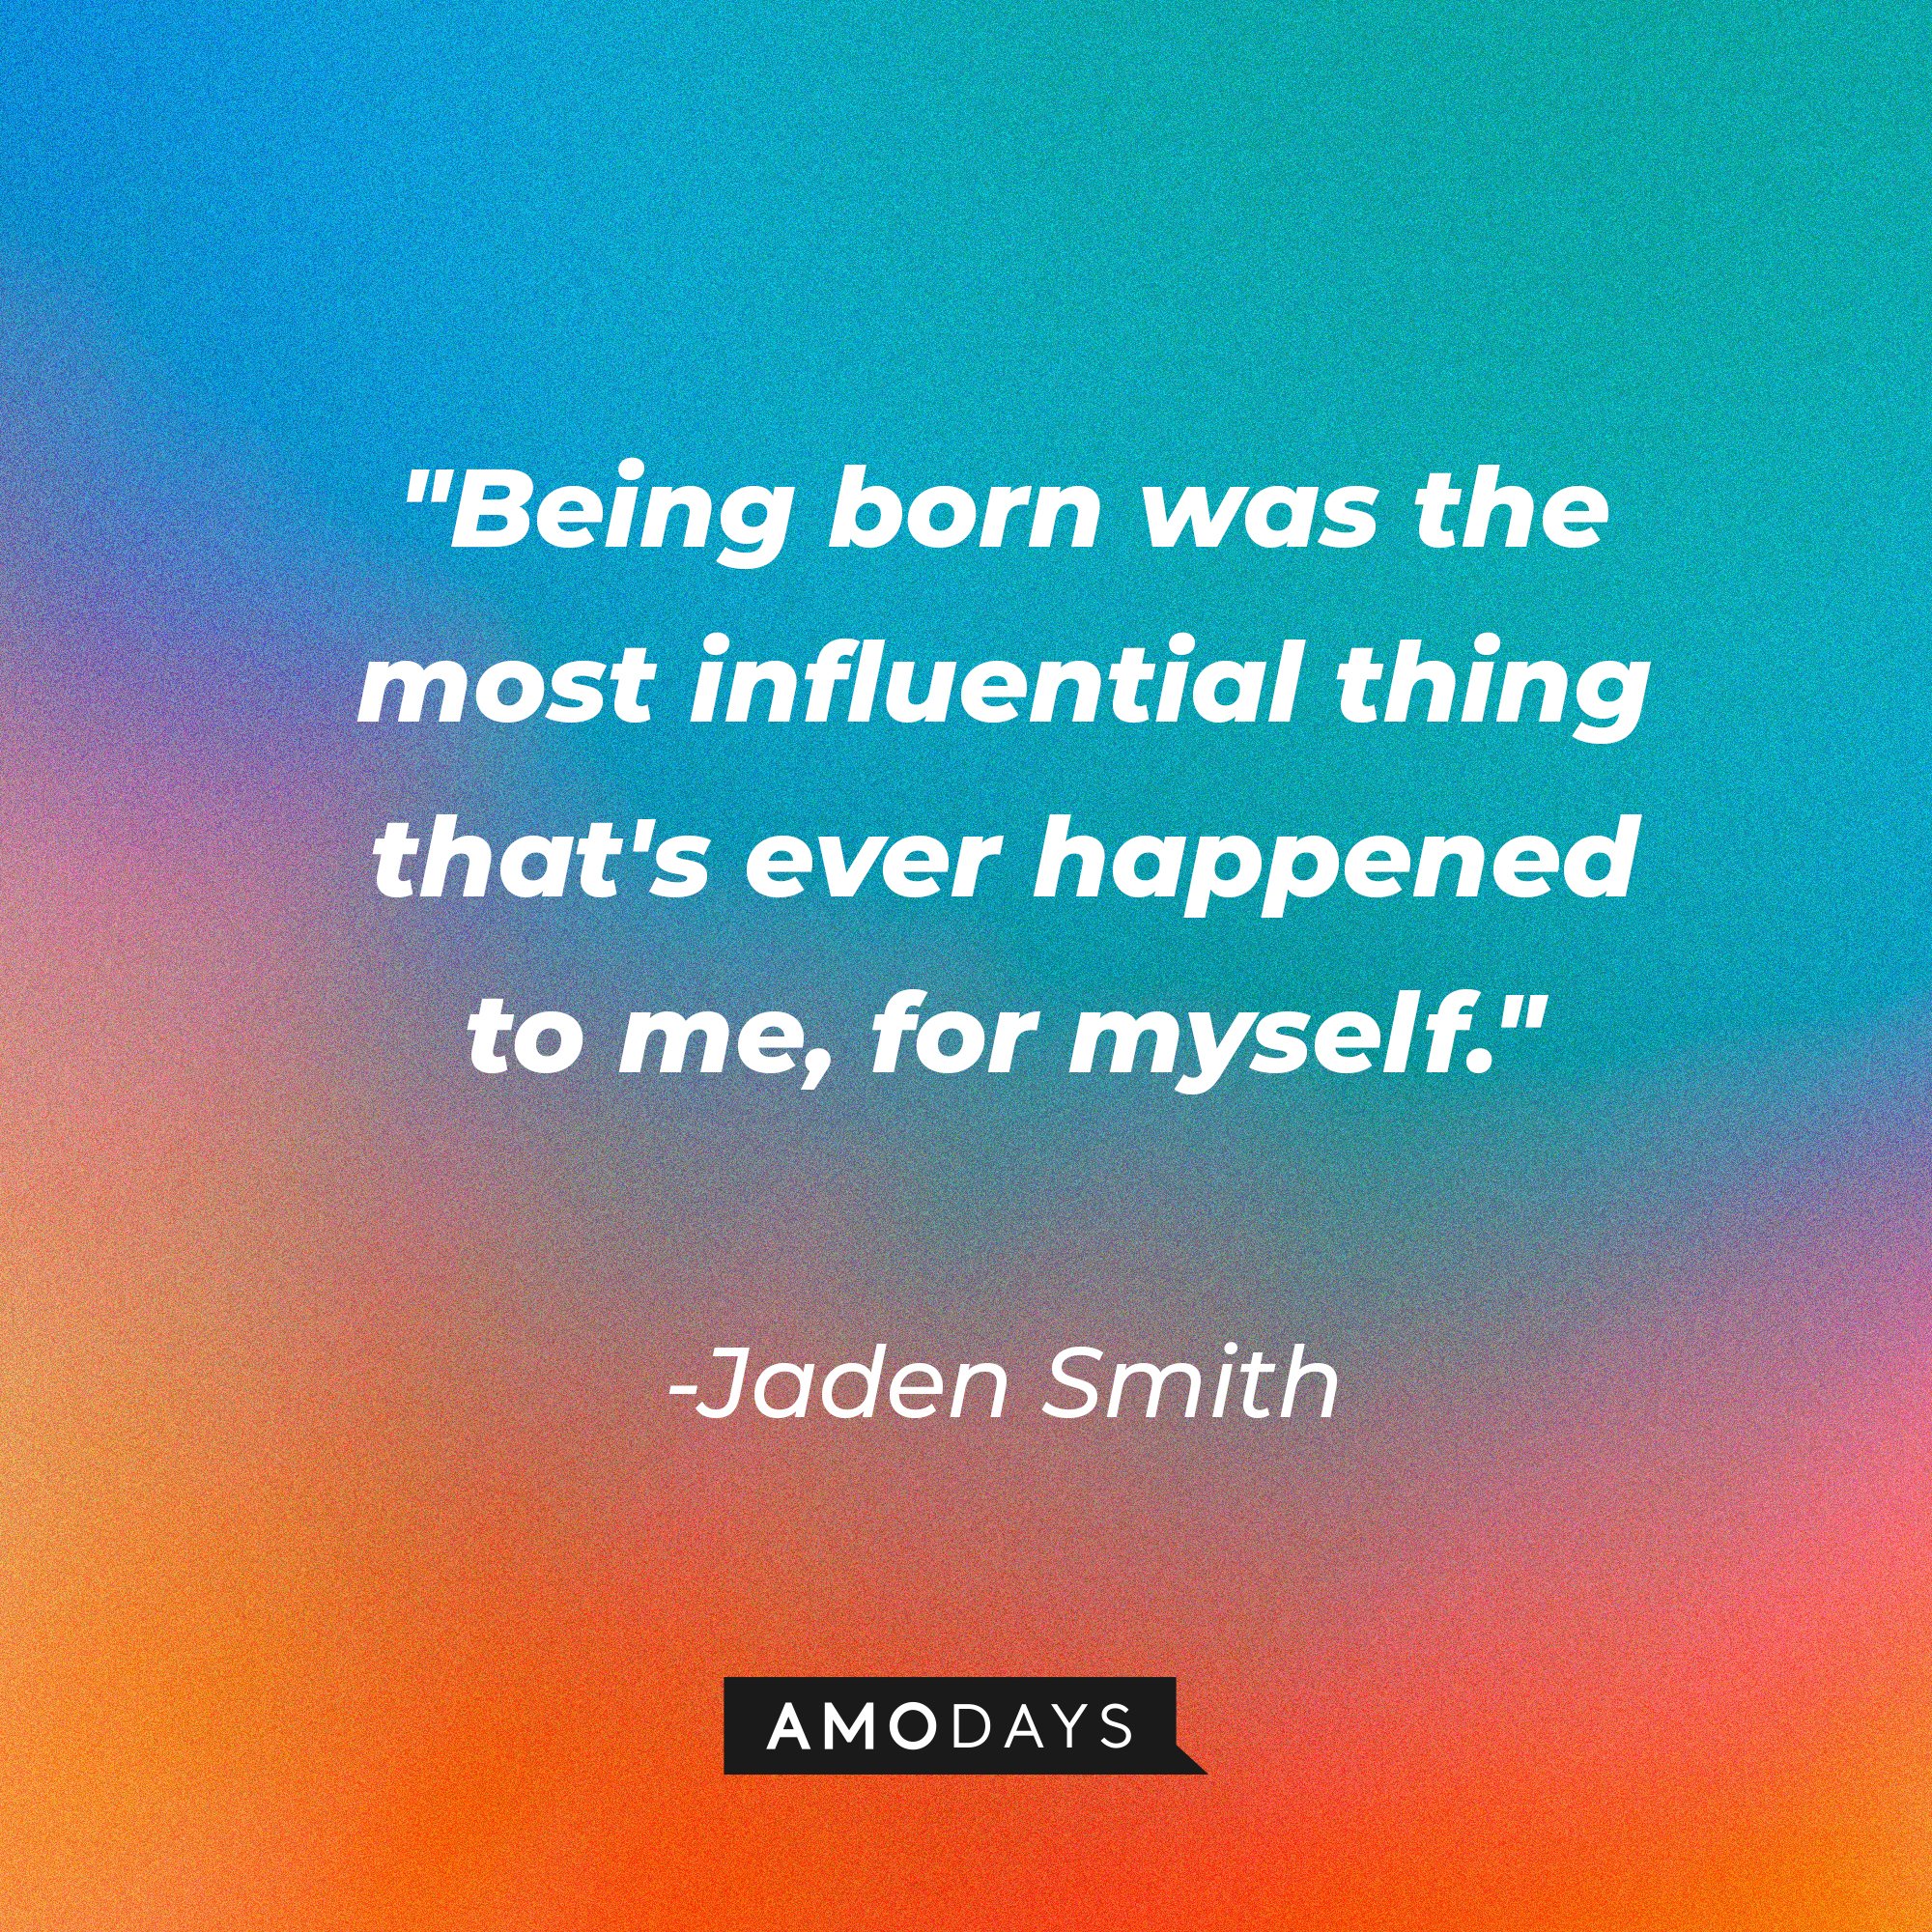 Jaden Smith's quote: "Being born was the most influential thing that's ever happened to me, for myself." | Image: AmoDays